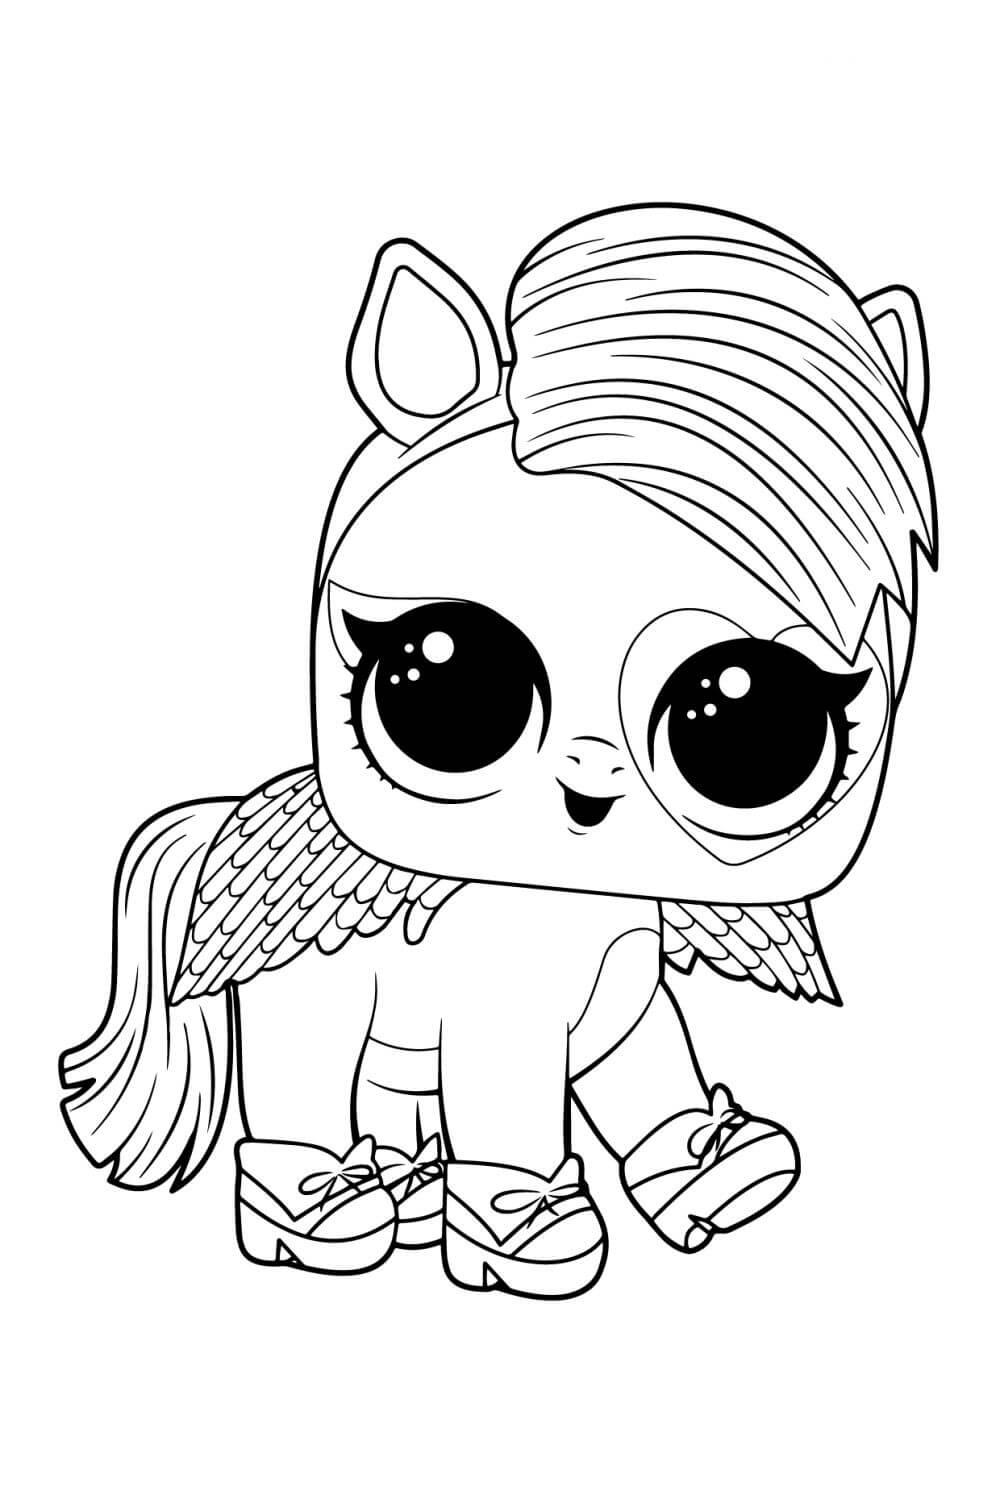 LOL Pet Pony Pretty Girl Coloring Page   Free Printable Coloring ...